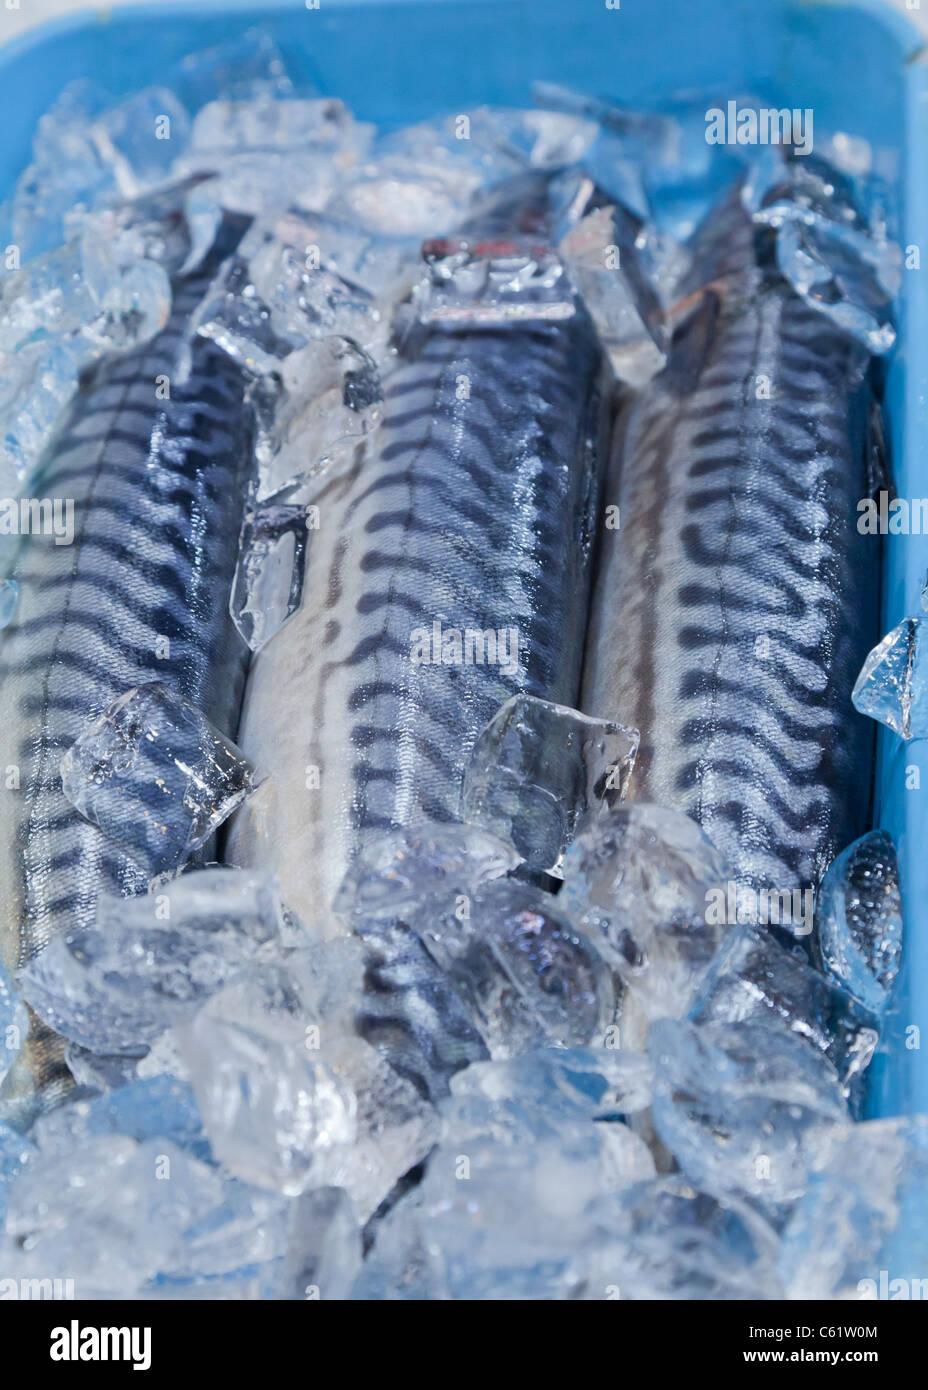 Fresh fish for sale on ice in a blue container Stock Photo